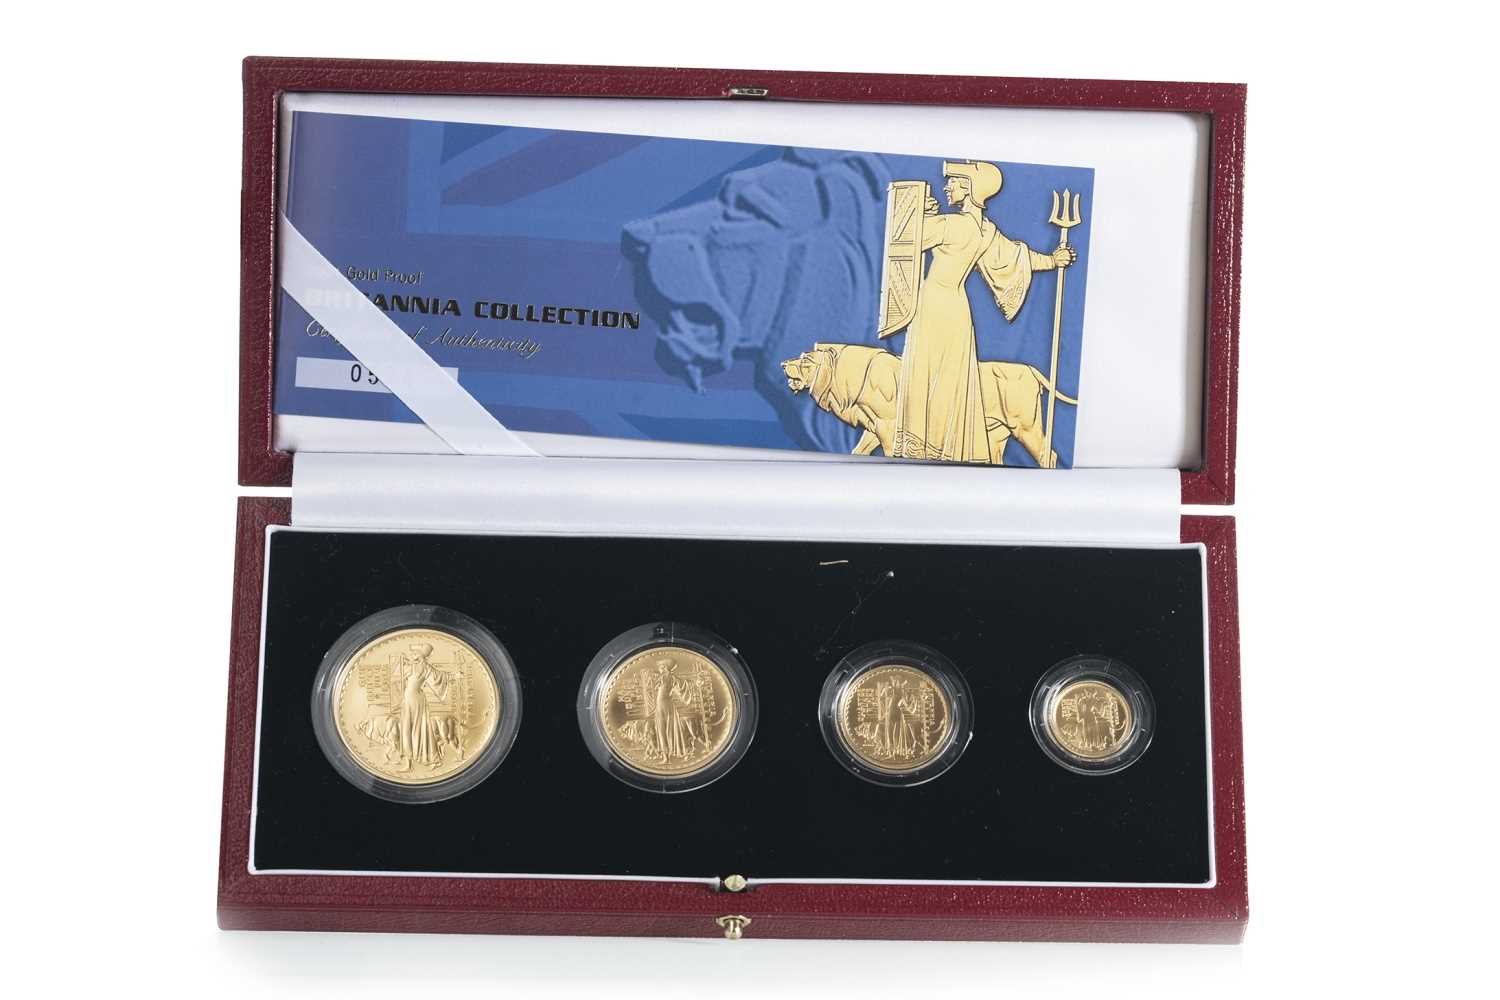 Lot 30 - 2001 GOLD PROOF BRITANNIA COLLECTION FOUR COIN SET